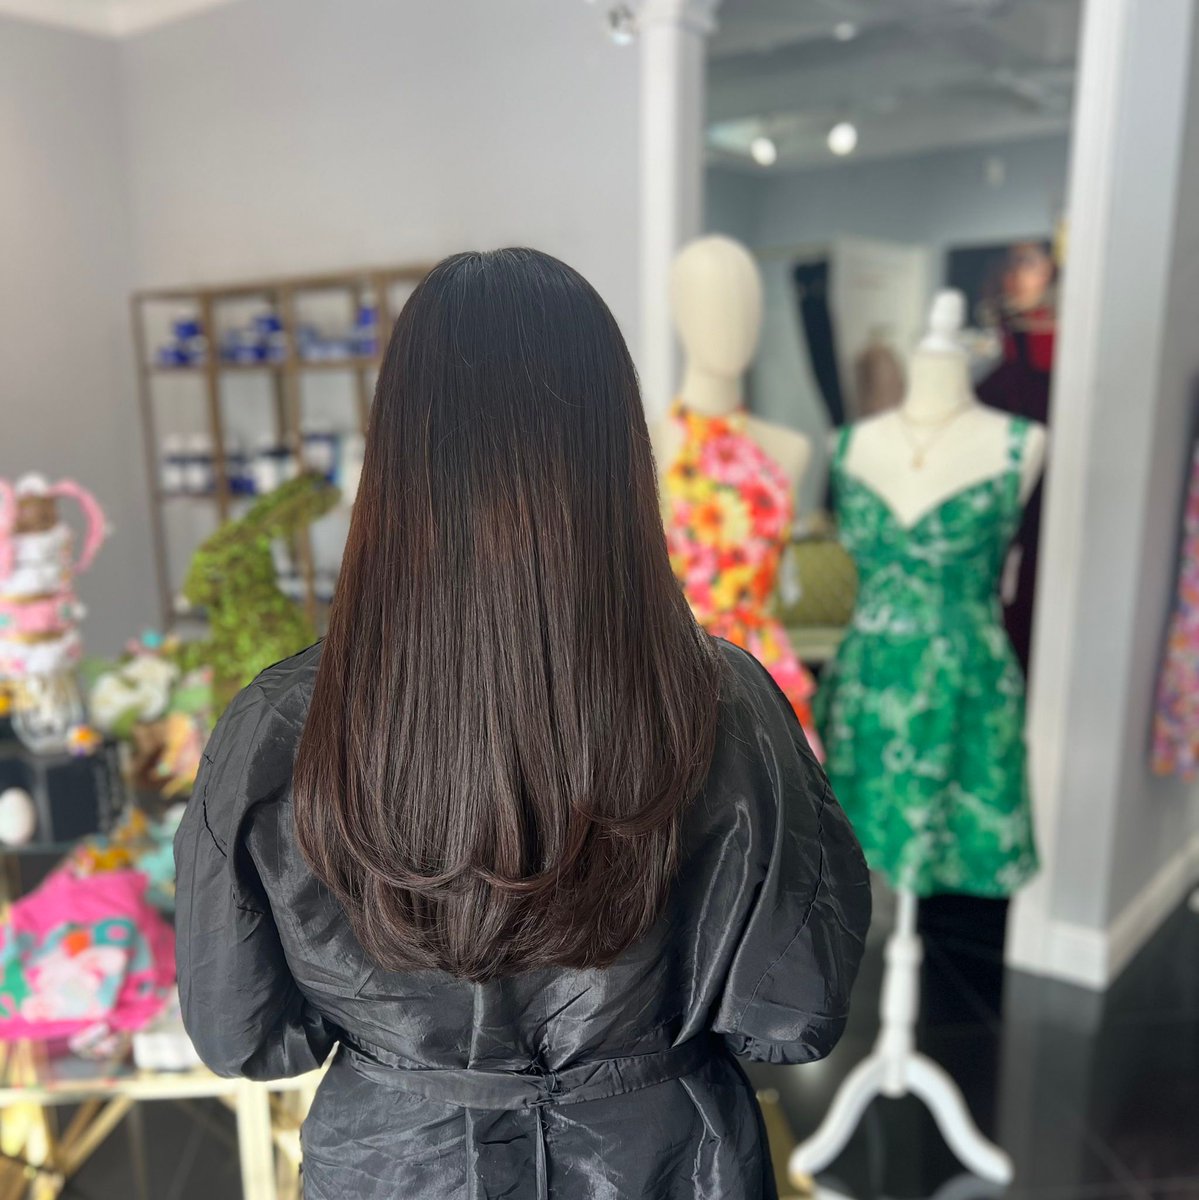 Tammy came in to get a haircut with Gracie. She has been so busy with school she hasn’t been in the salon in over a year she absolutely loved the outcome! 

#tomballhairstylists #nbrextensions #woodlandshairstylists #thewoodlandstx #houston #conroehairsalon #oribe #luxuryhair